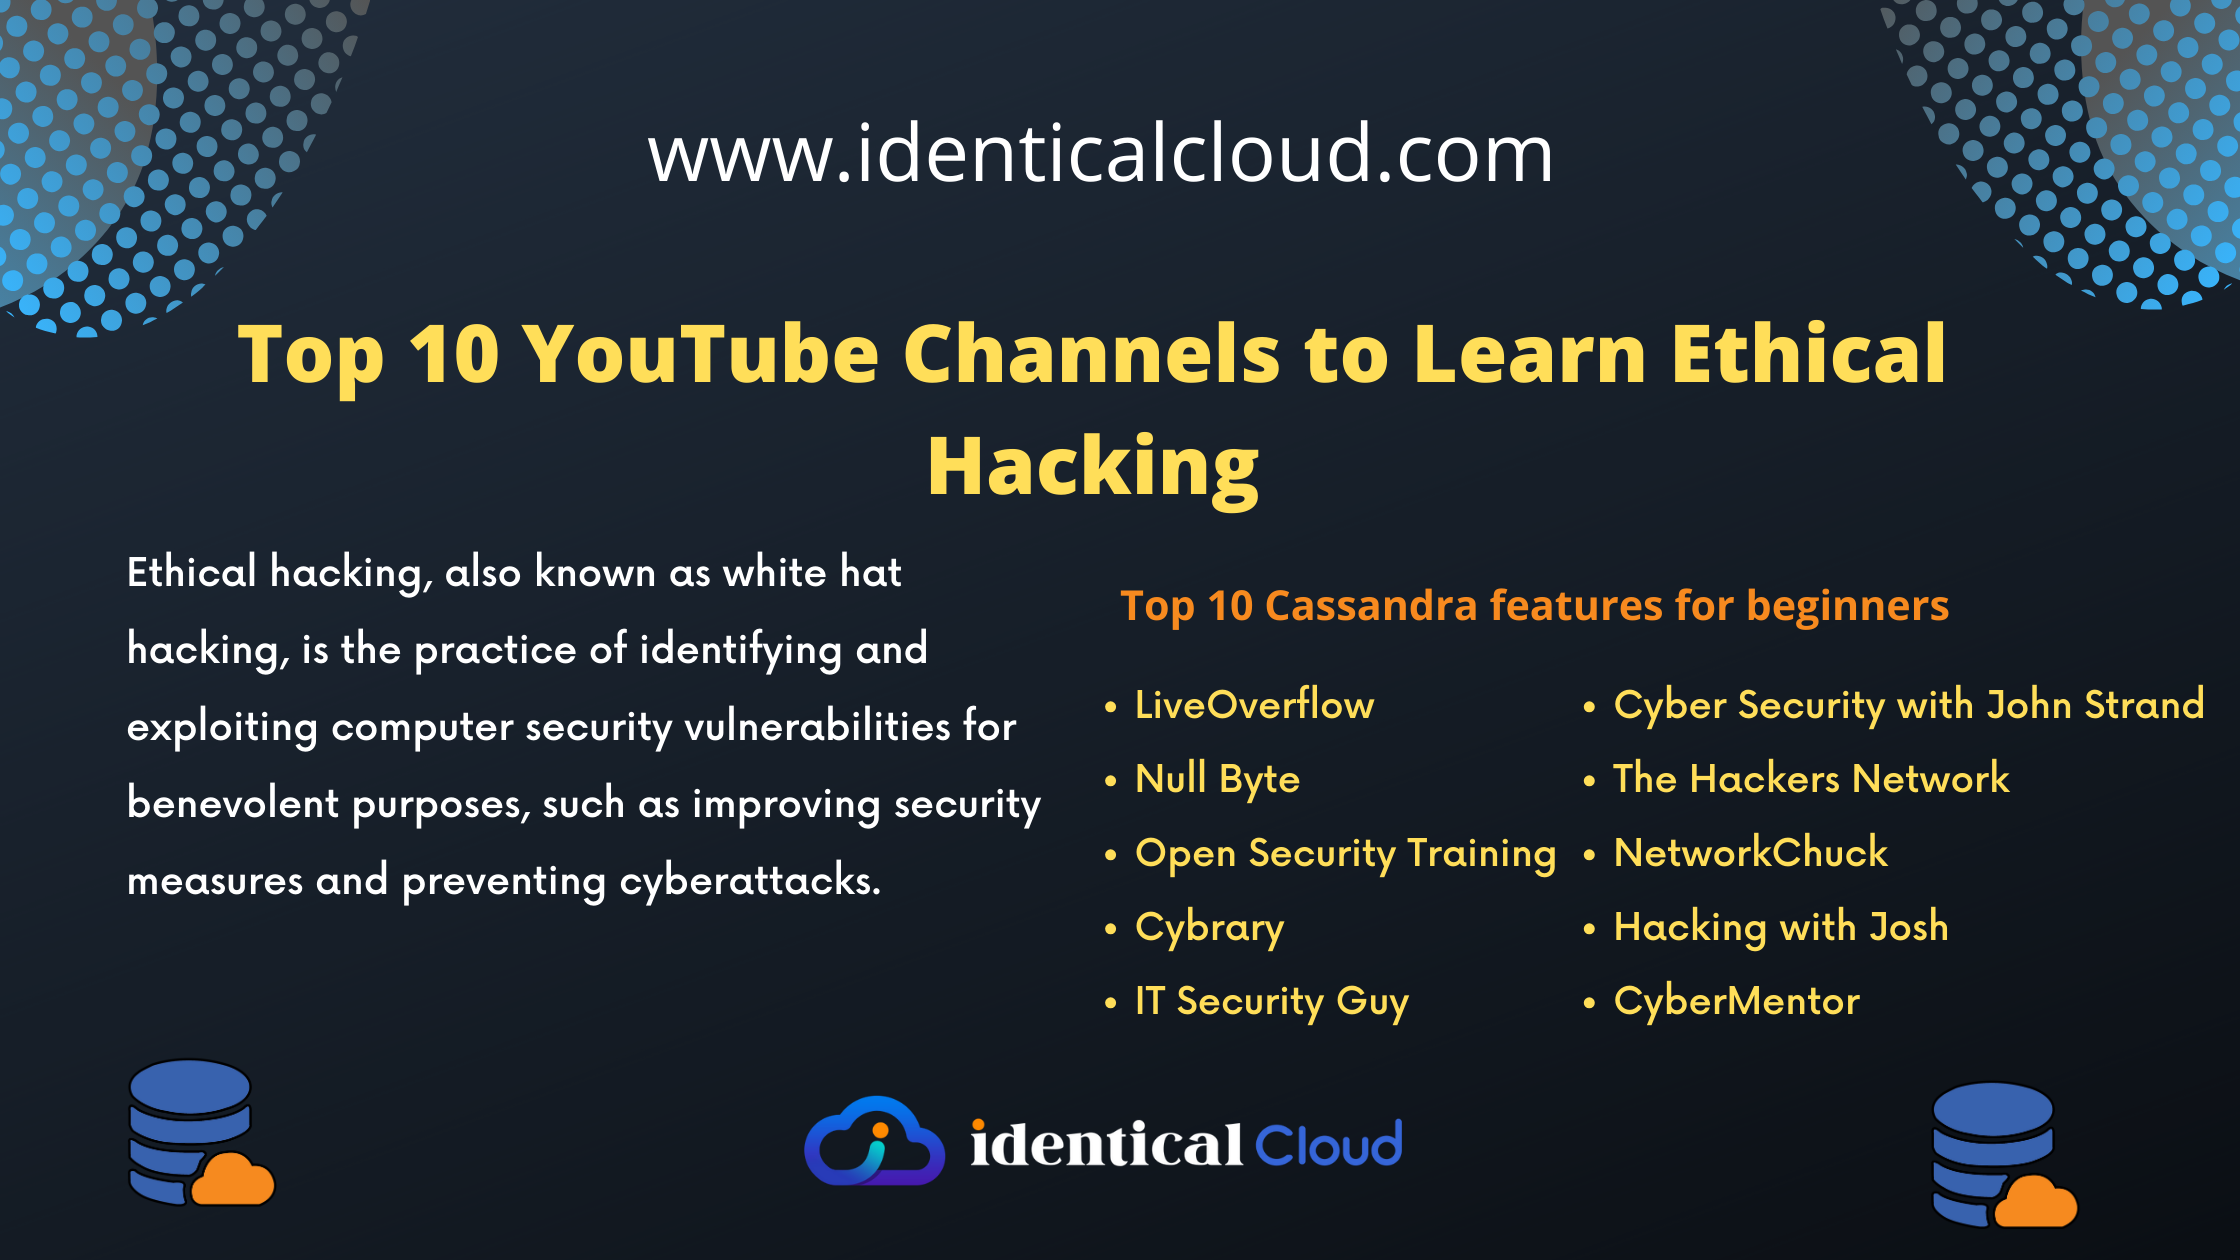 Top 10 YouTube Channels to Learn Ethical Hacking - identicalcloud.com